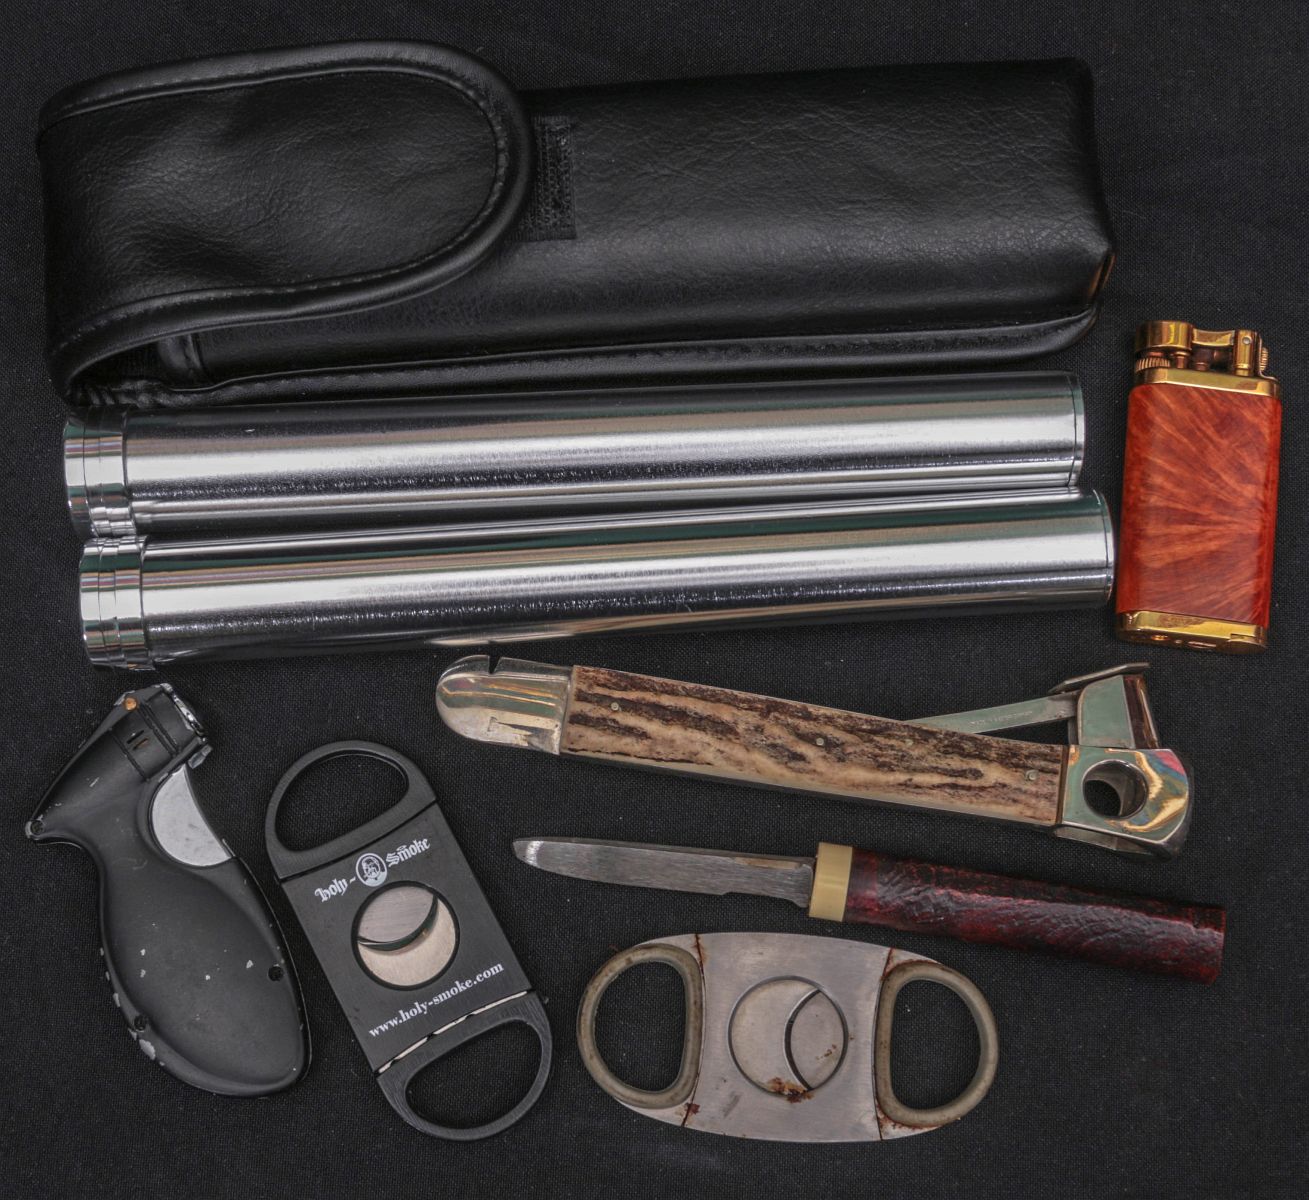 A GROUP OF TOBACCO SMOKING ACCESSORIES